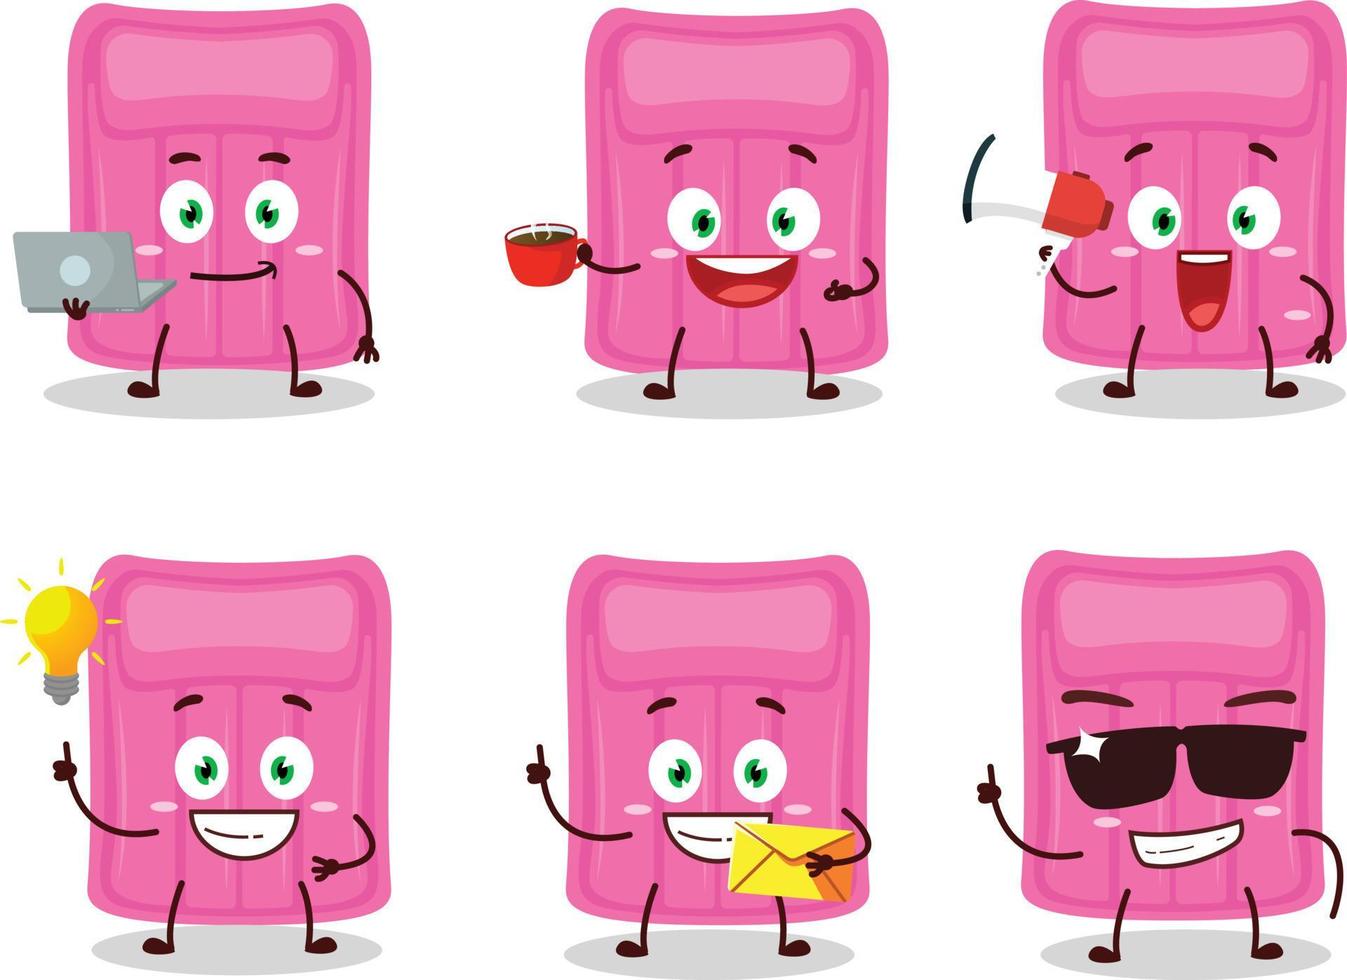 Air mattress cartoon character with various types of business emoticons vector